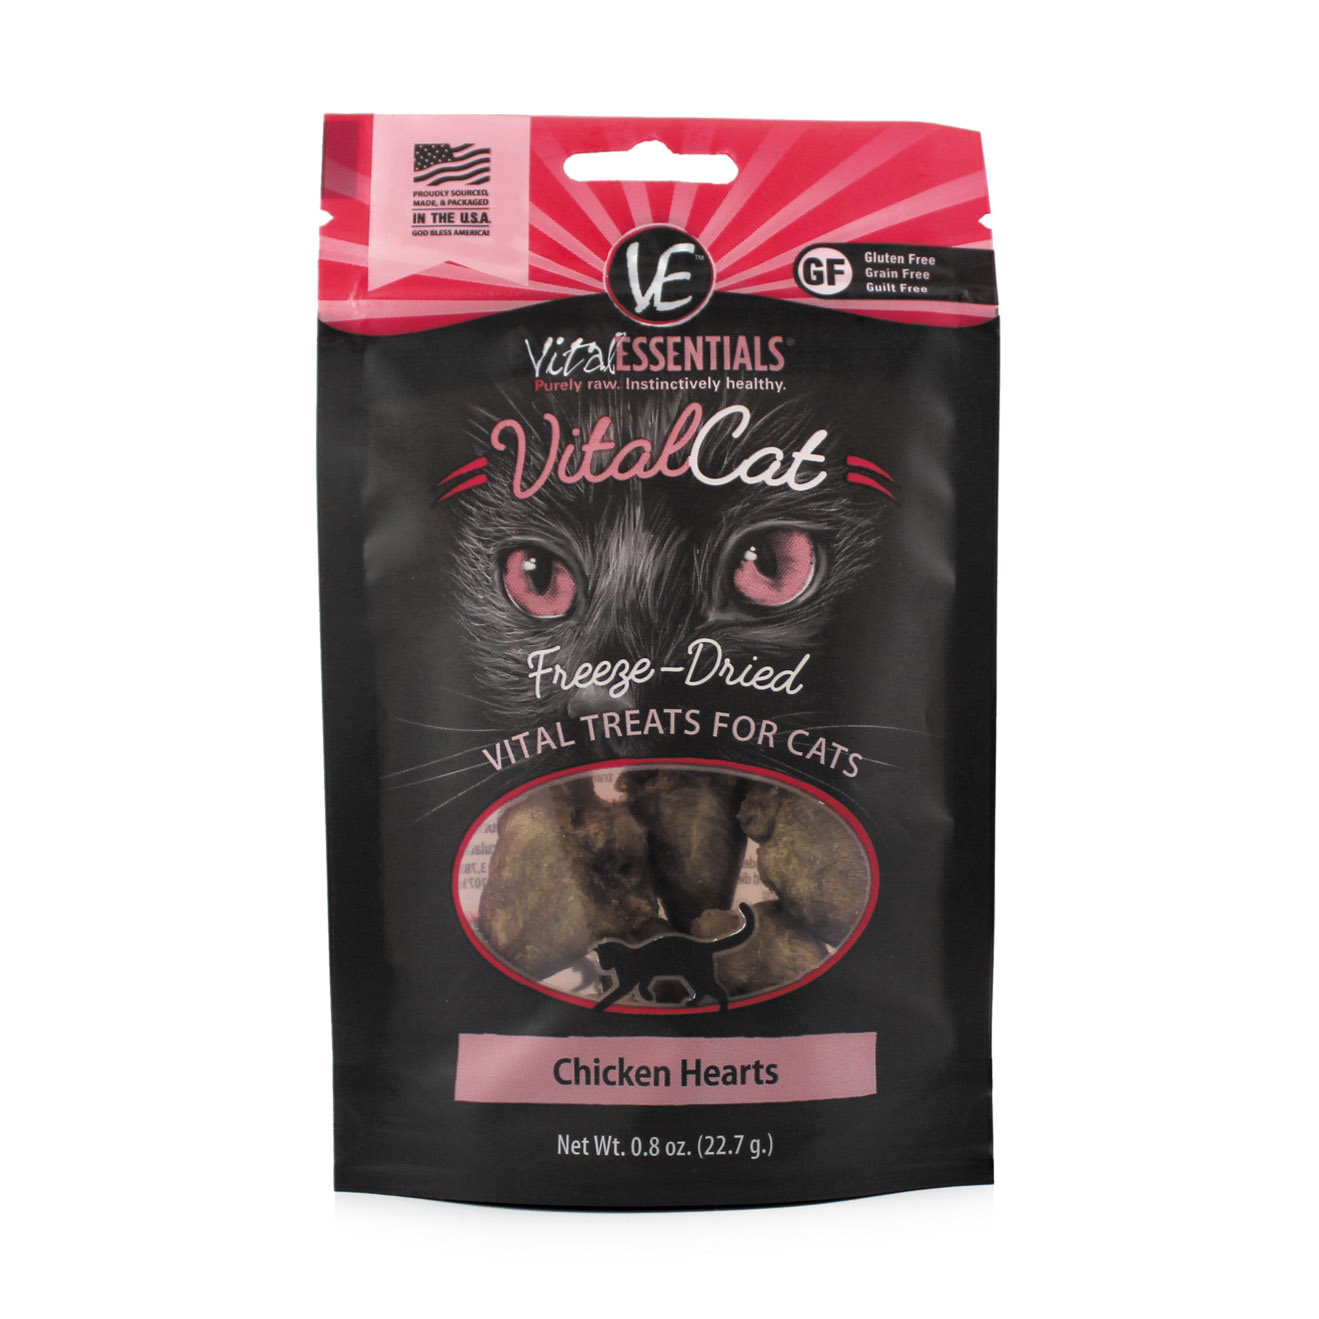 Vital Essentials Chicken Hearts Freeze-Dried Treats for Cats, .8 oz